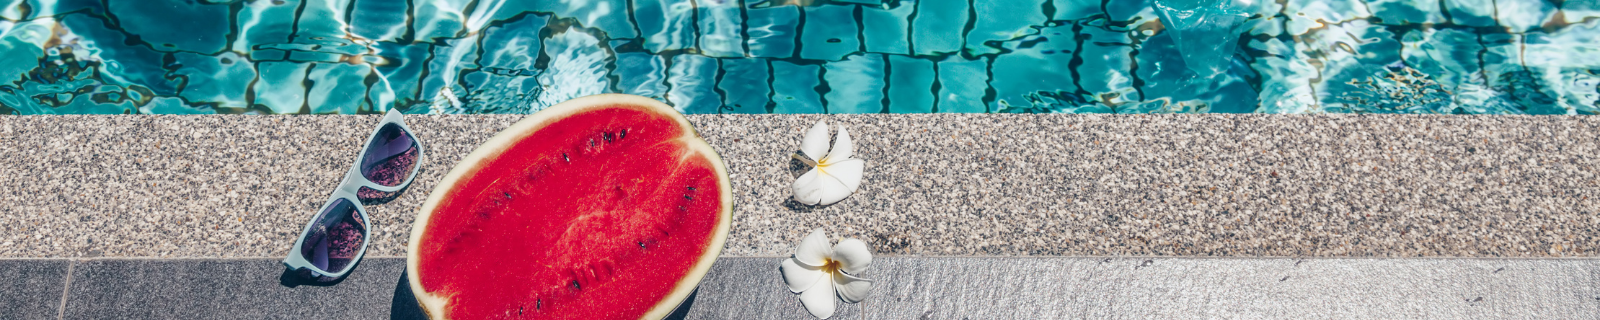 Poolside with a pair of sunglasses, some white flowers and half a watermelon